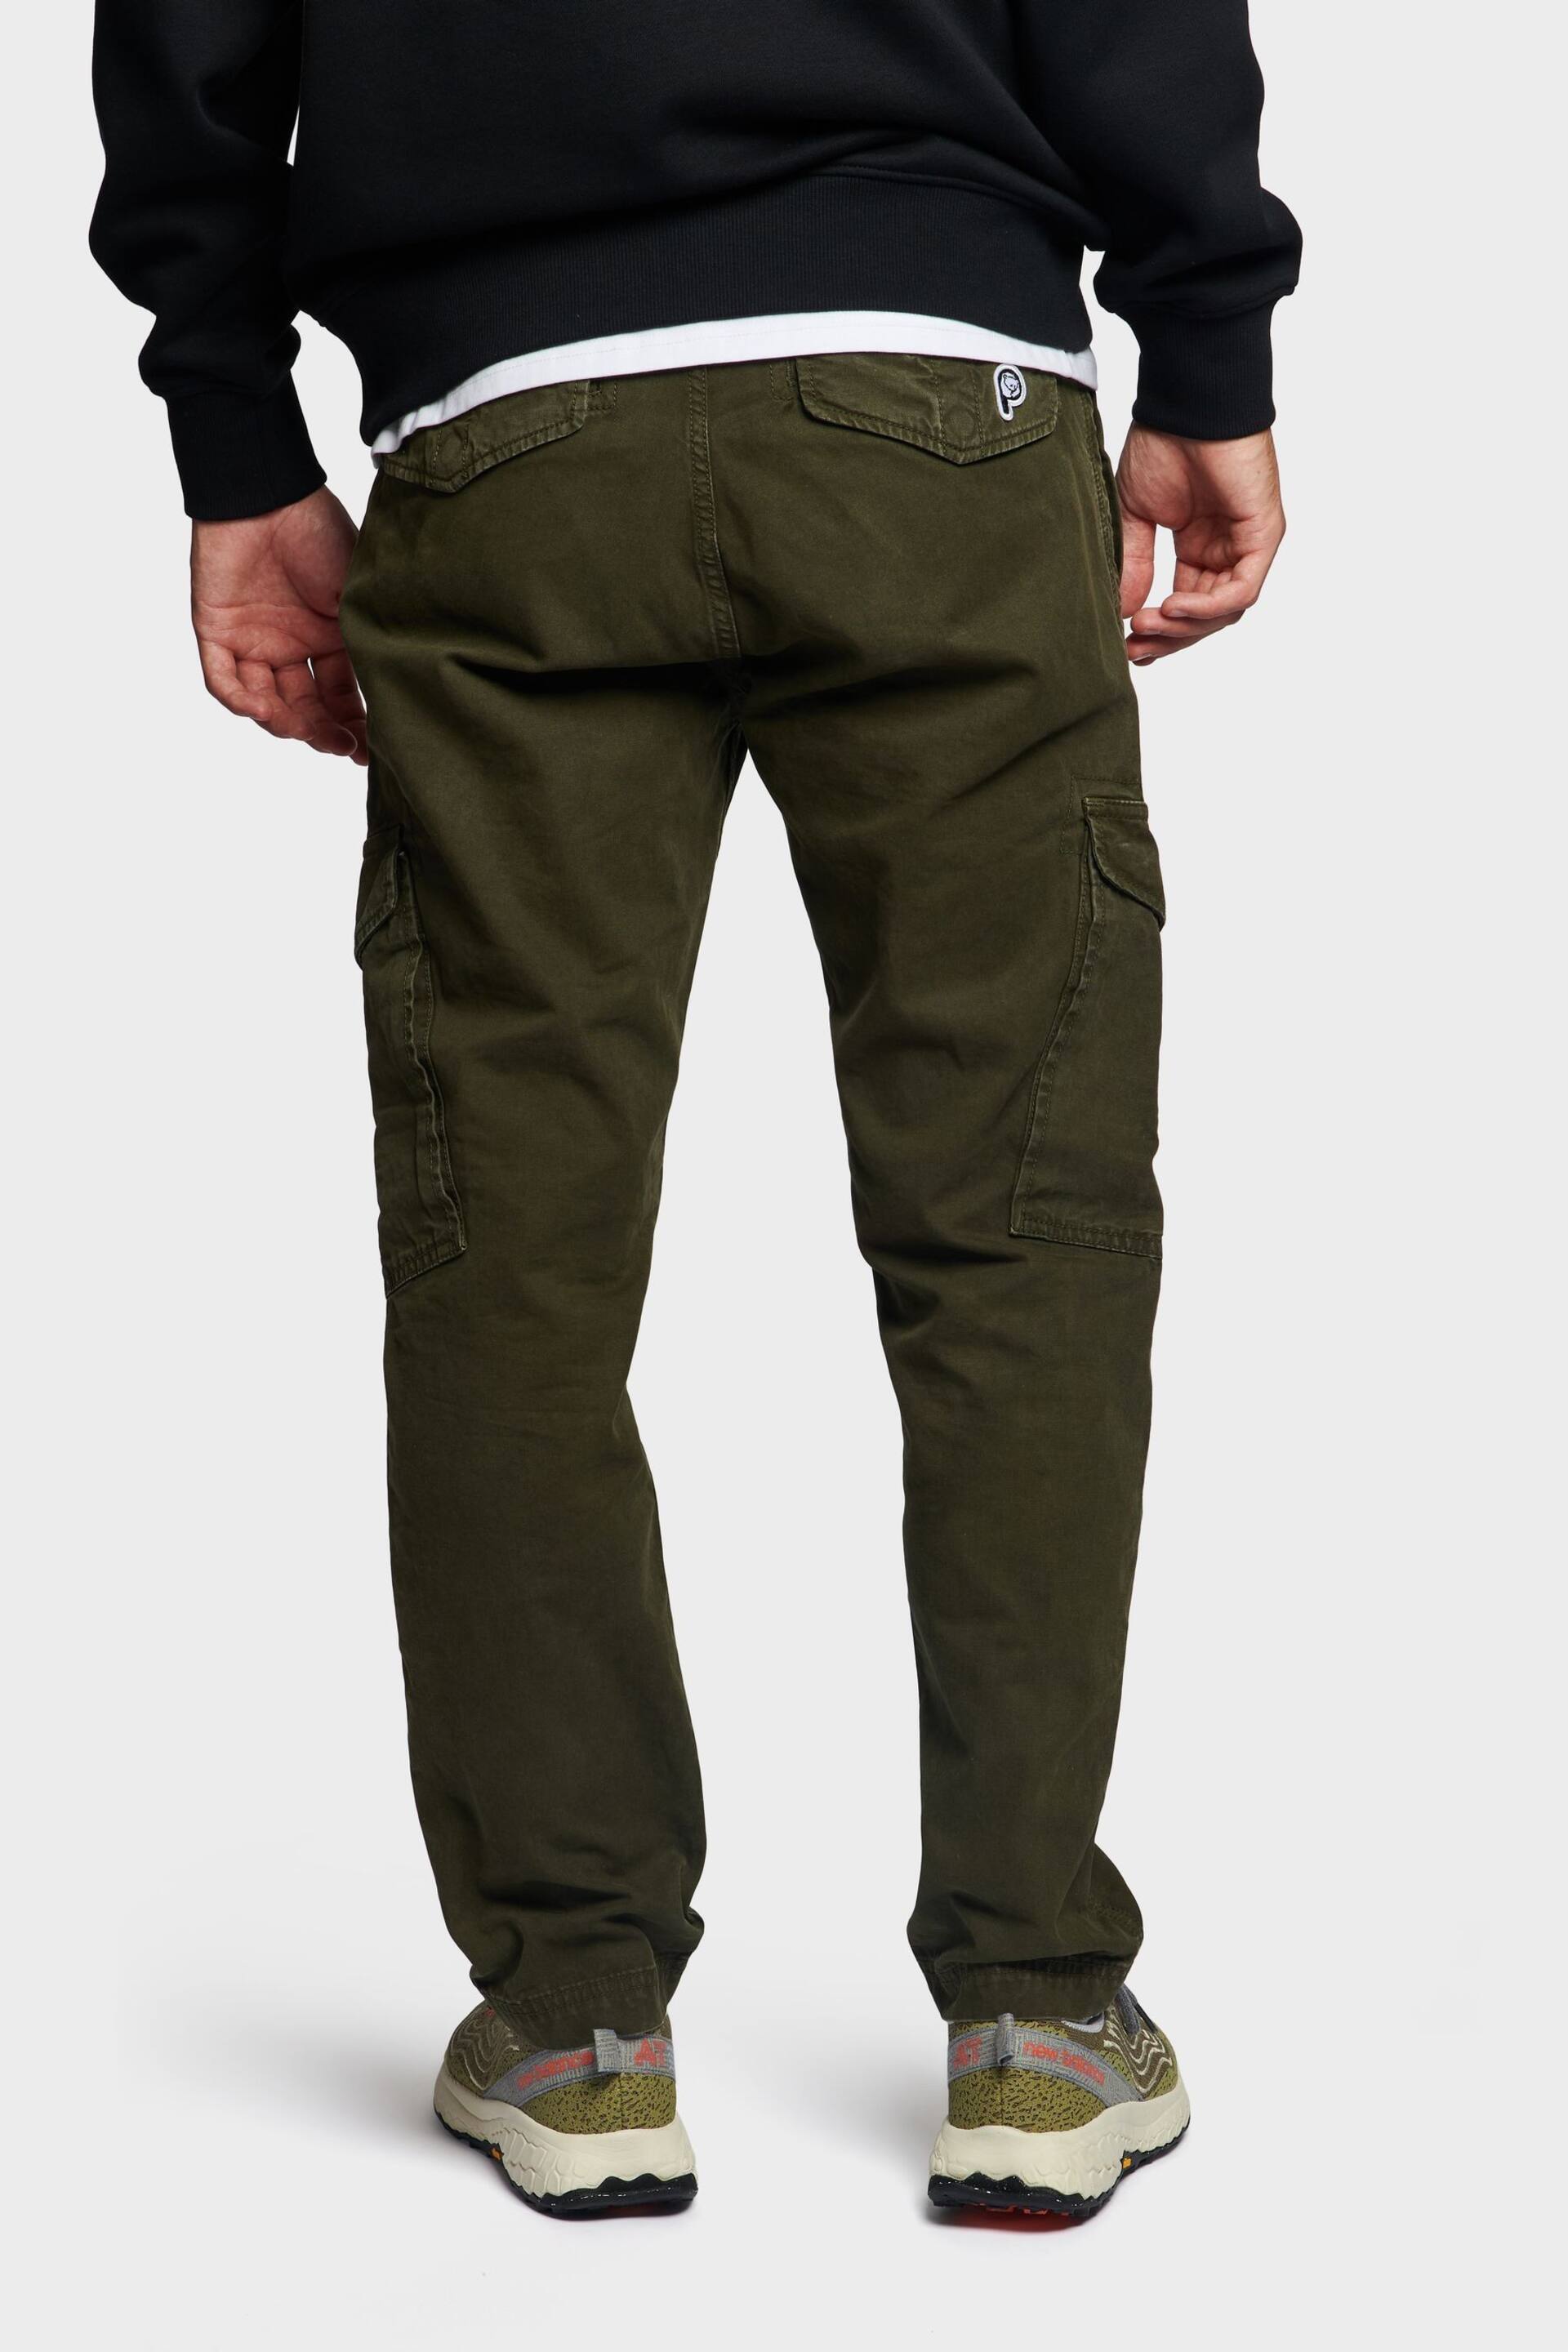 Penfield Green Bear Cargo Trousers - Image 2 of 7